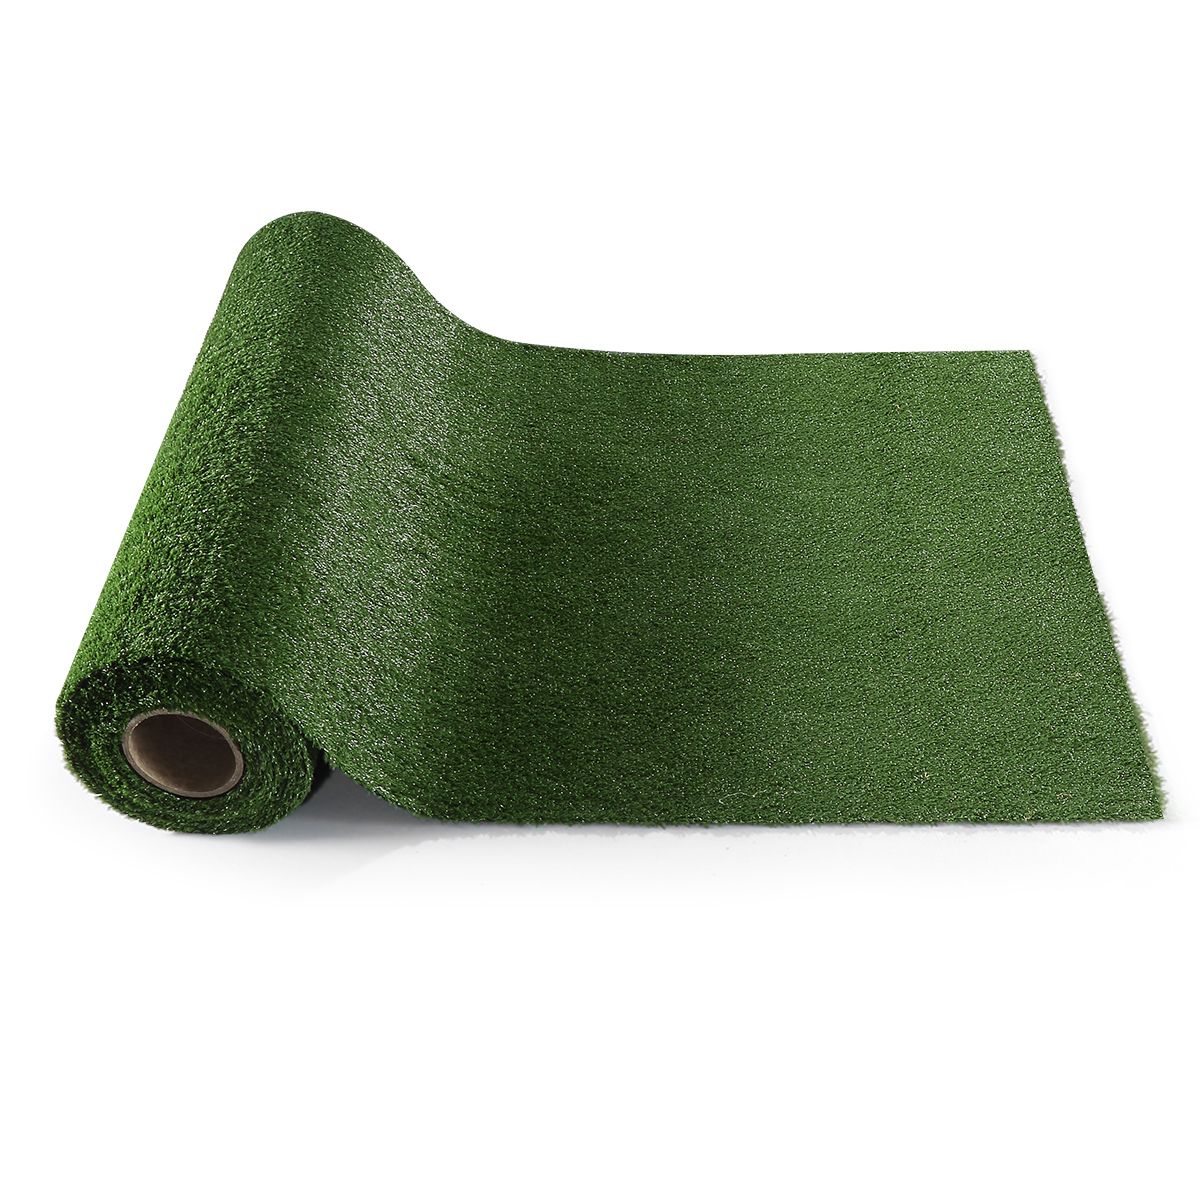 Artificial Grass Turf - Two Sizes Available